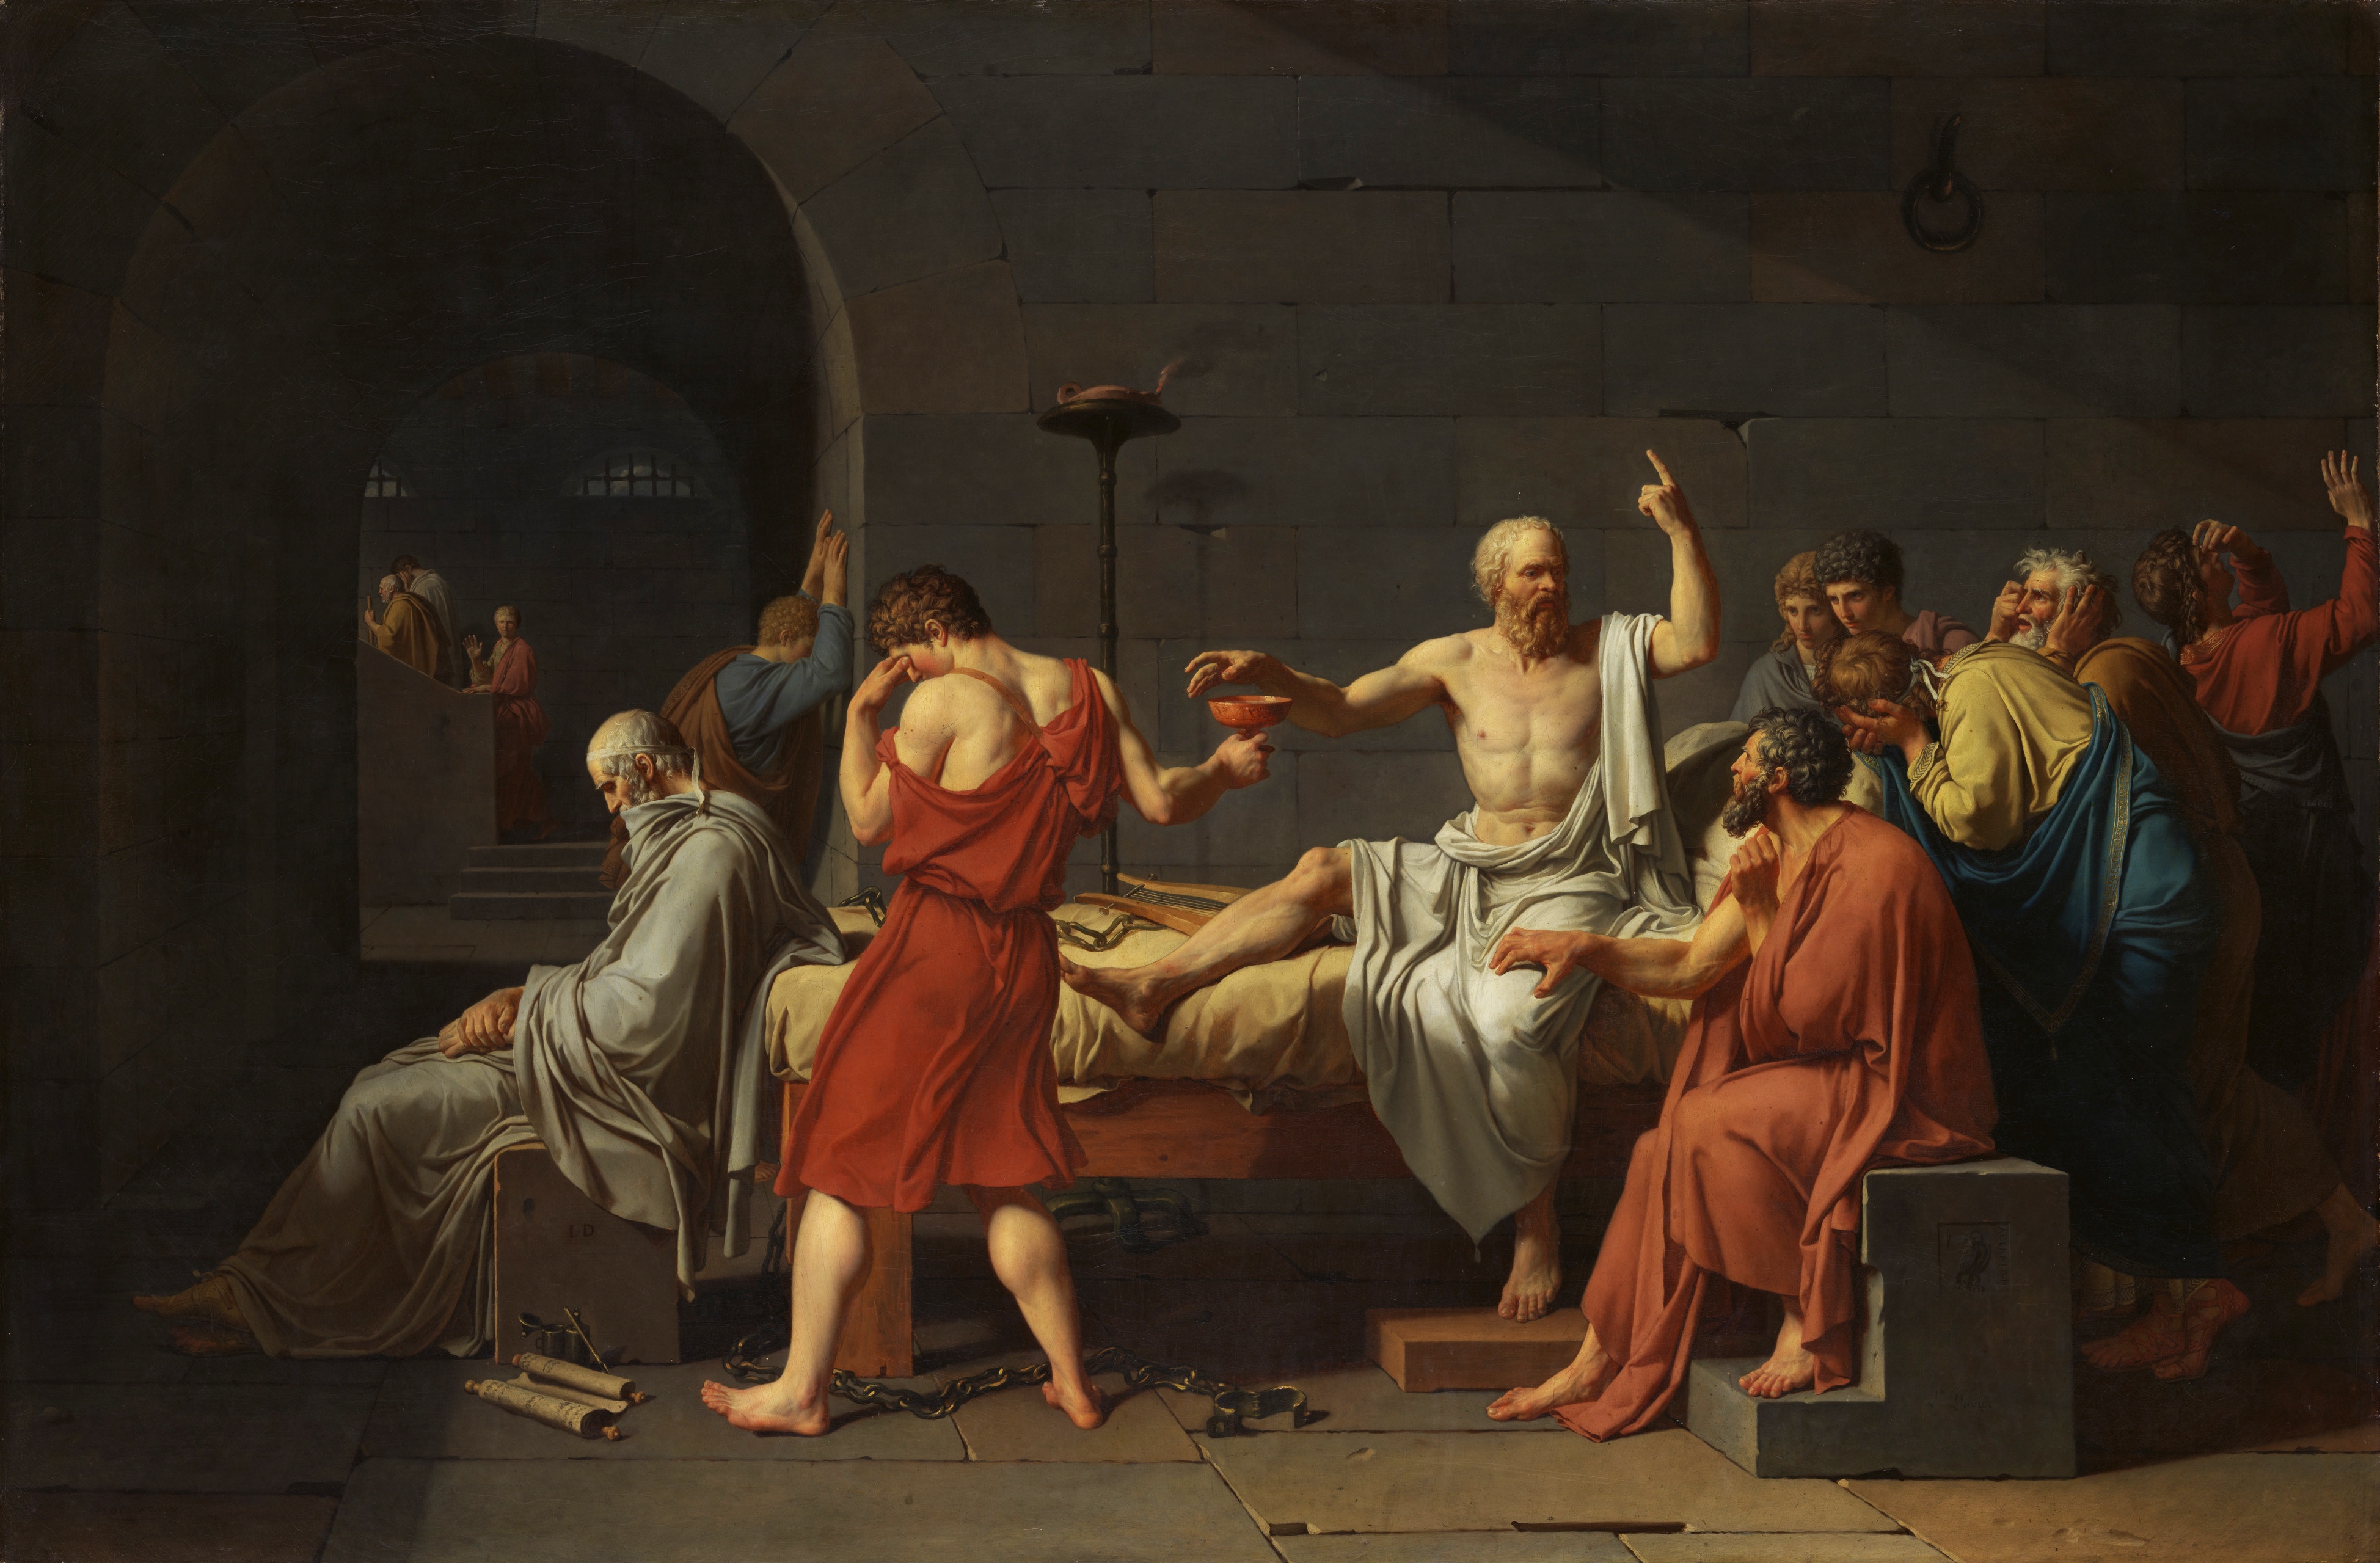 "The death of Socrates" by Jacques-Louis David around 1787.